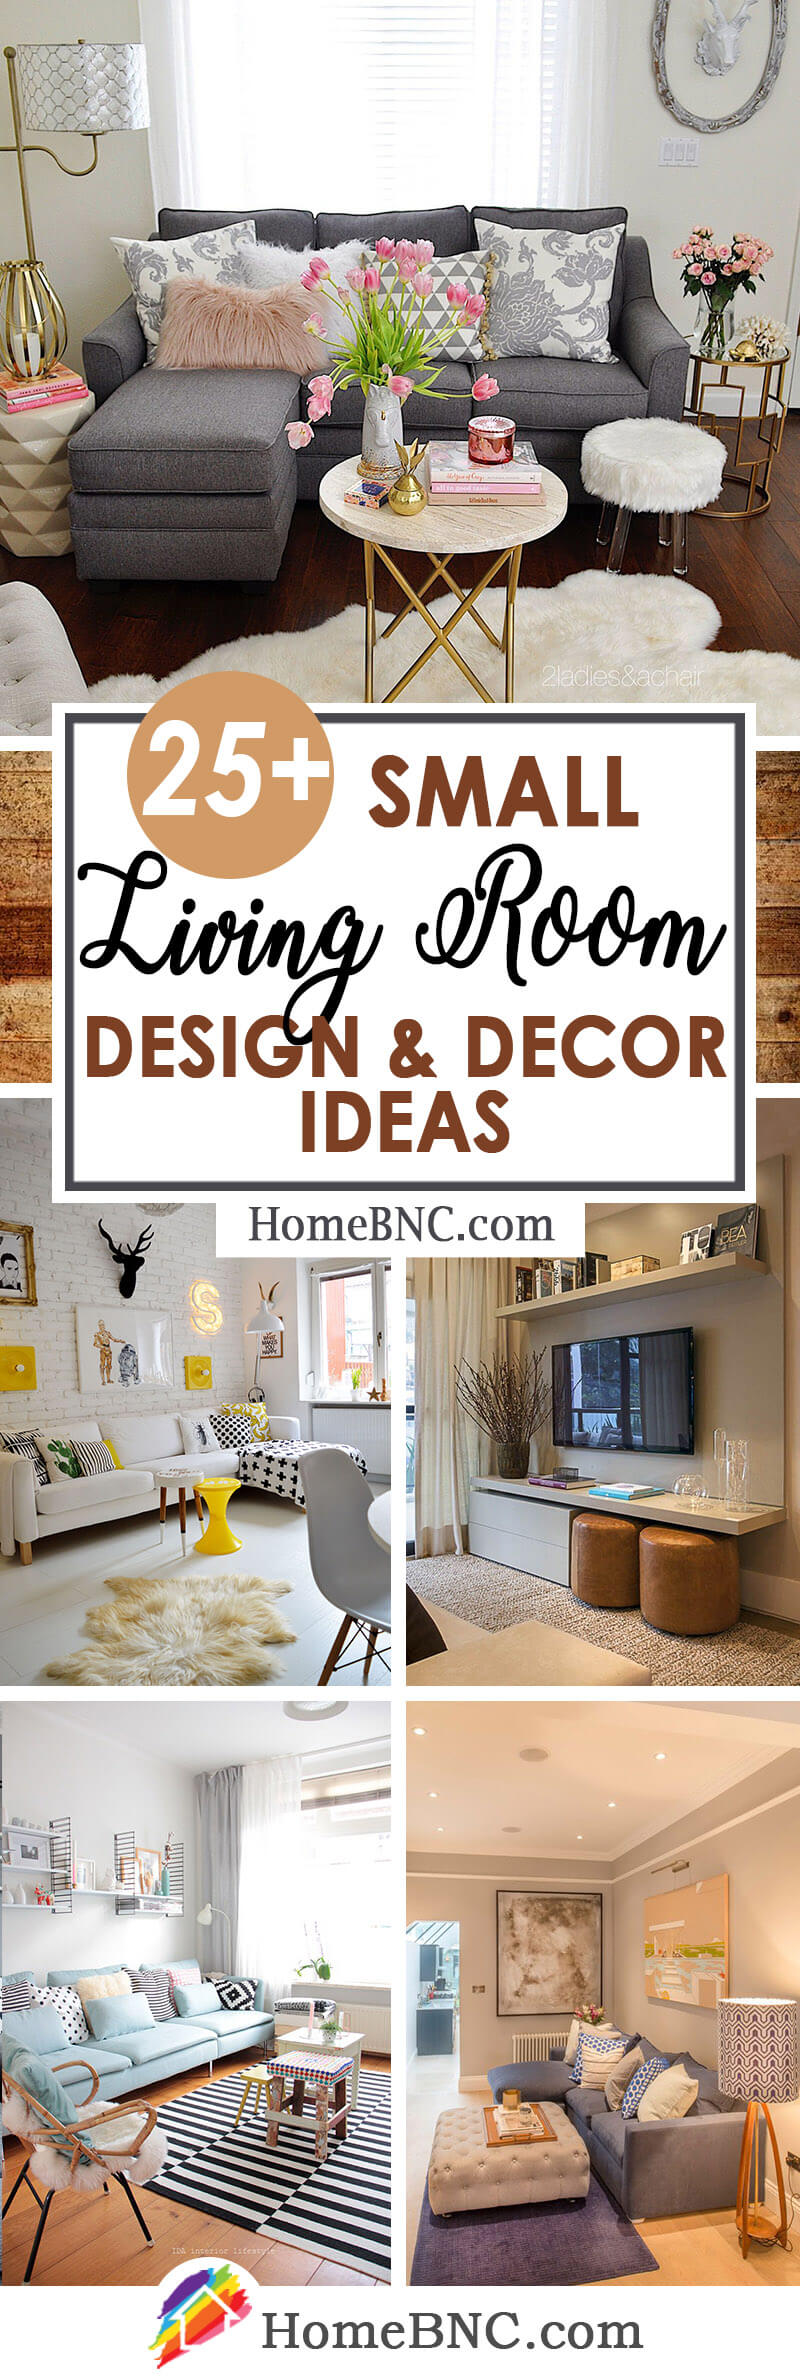 10 Simple and Effective Ways to Decorate Your Home Instantly